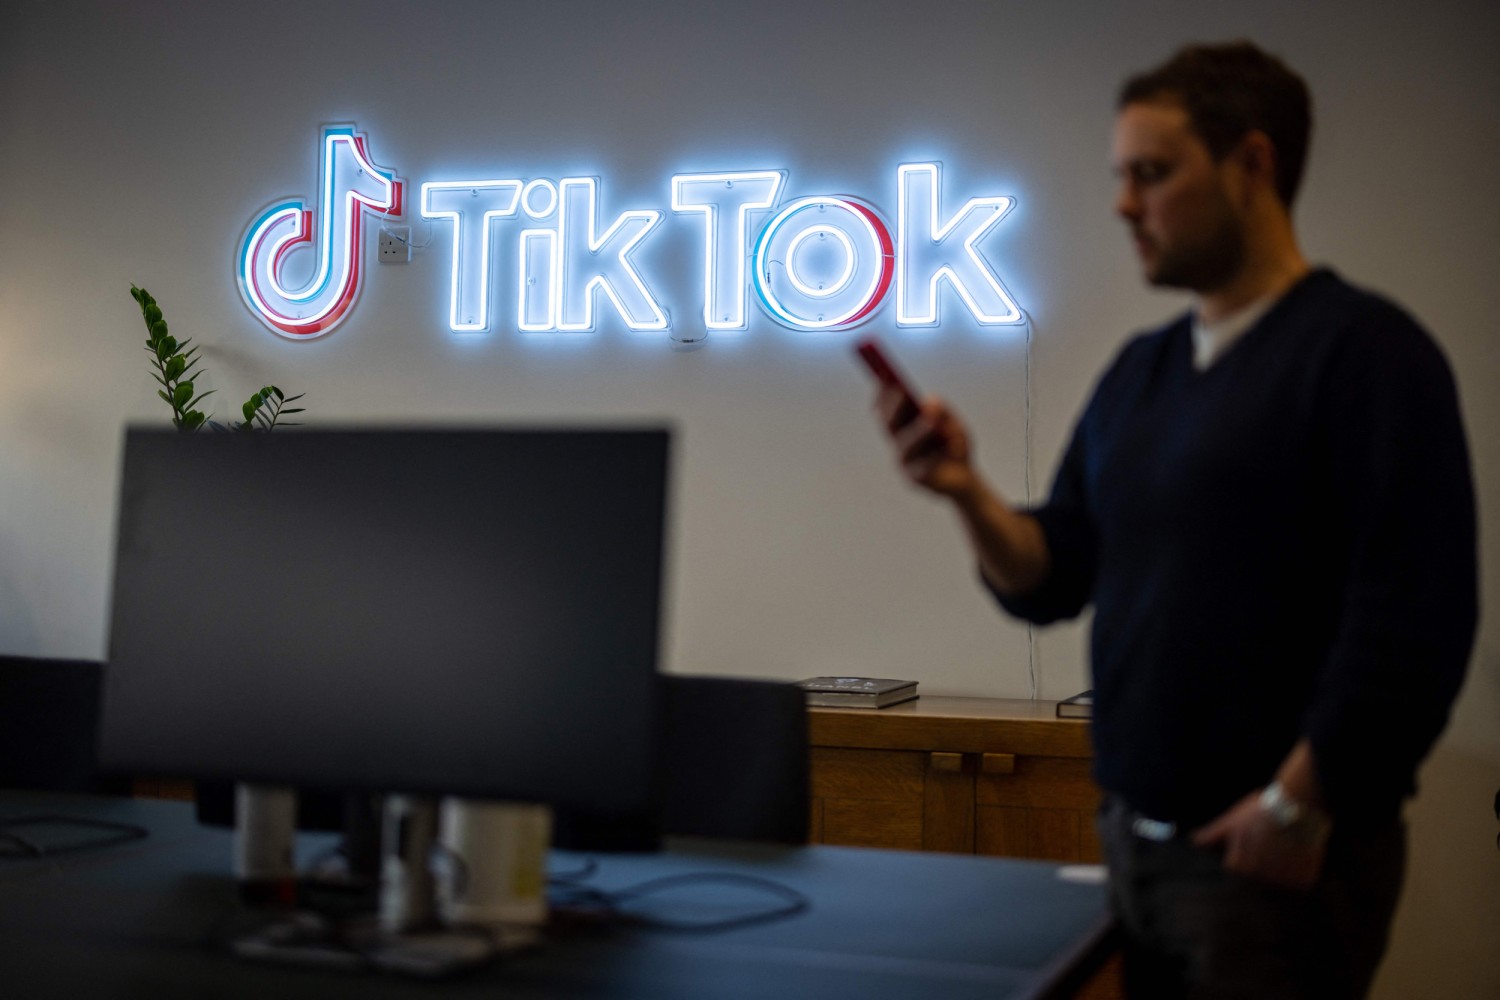 TikTunes Puts Tik Tok Influencers on the Map and Guides Their Content  Creation Towards Proper Monetization